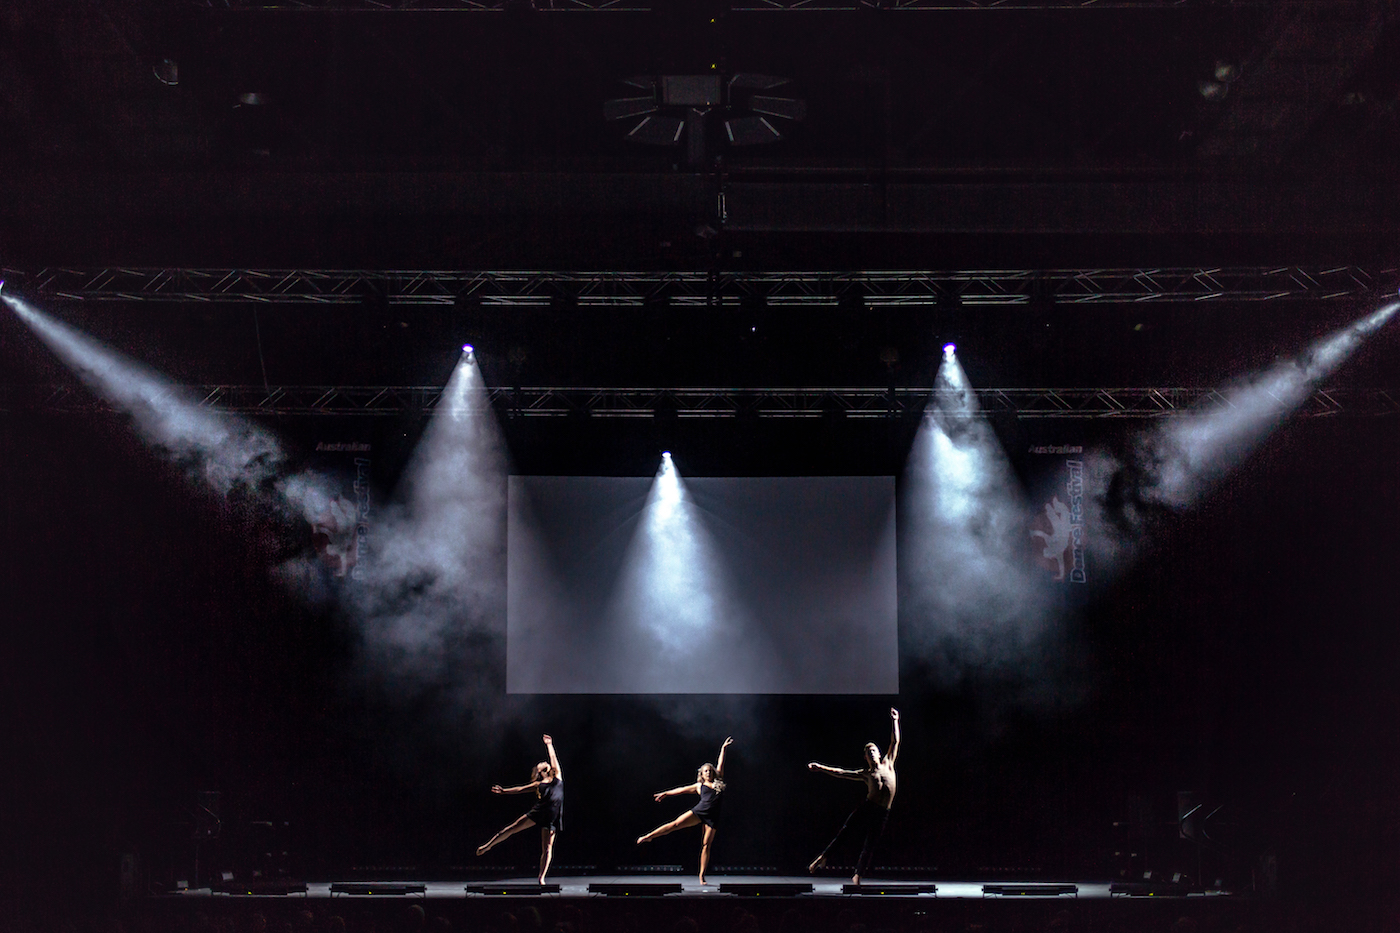  The Dream Dance Company performing ‘Prodigy’ at the 2018 Australian Dance Festival 